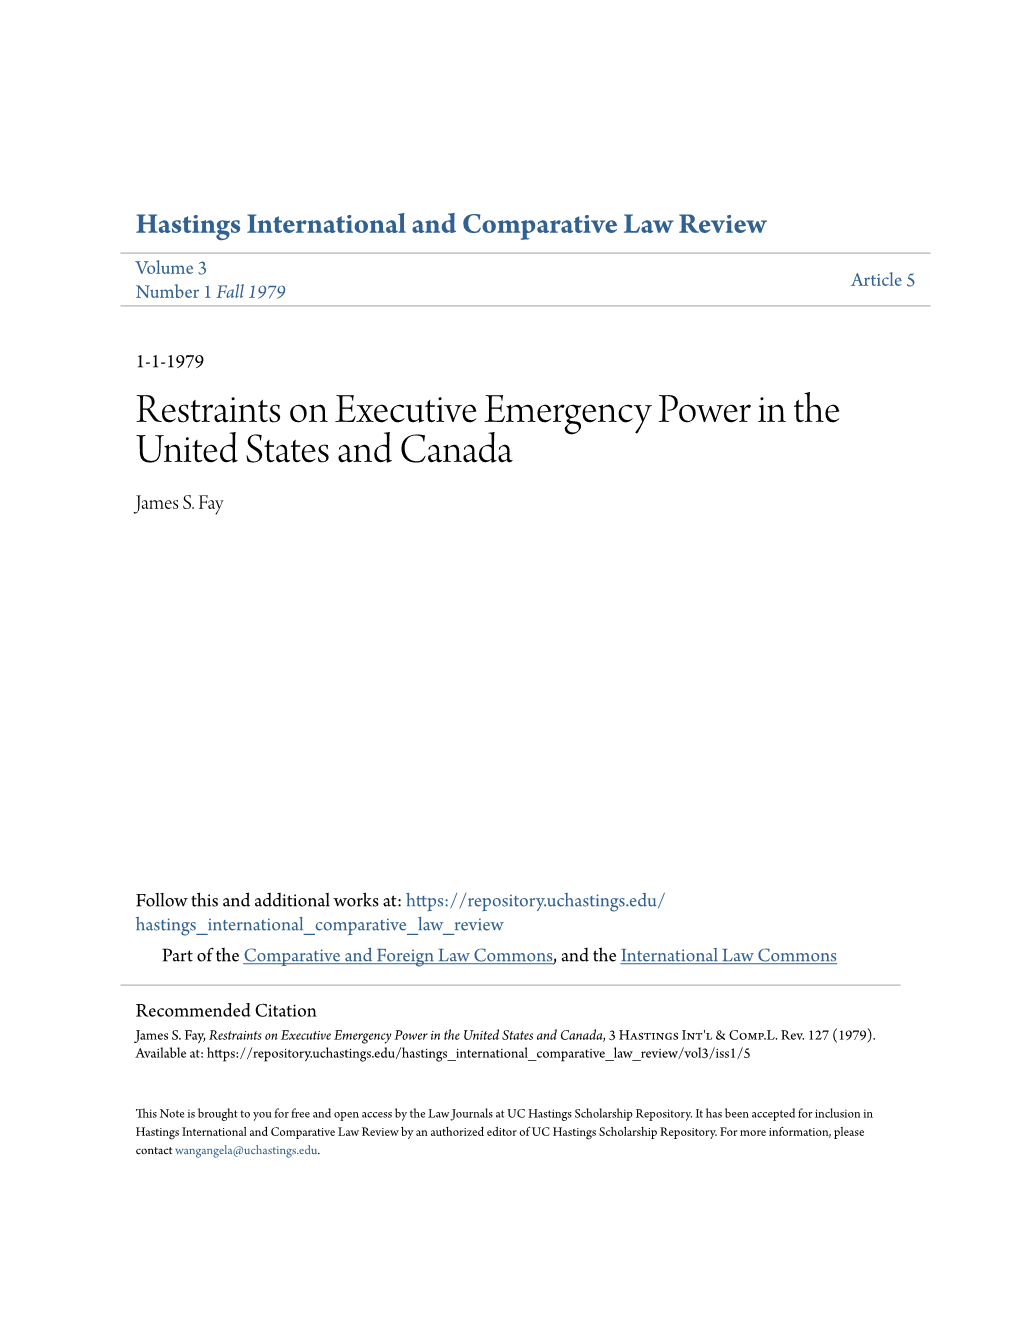 Restraints on Executive Emergency Power in the United States and Canada James S